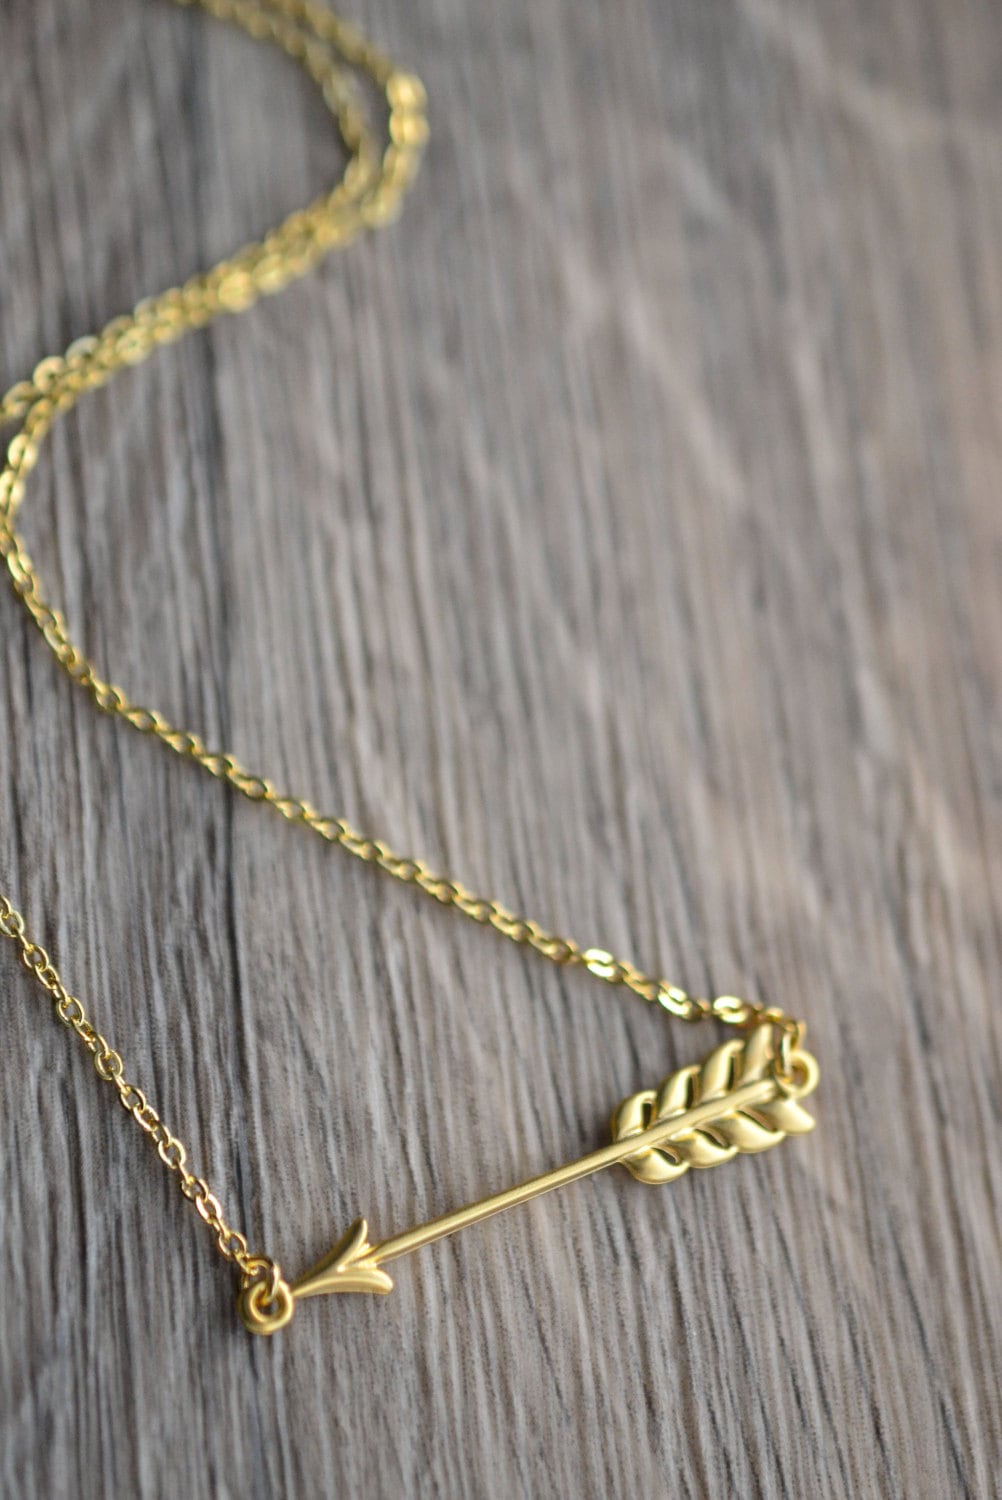 Gold Arrow Necklace // Cupid's Arrow Necklace // Small Arrow Necklace // Gift for Her // Bridesmaid Gift // Best Friend Gift